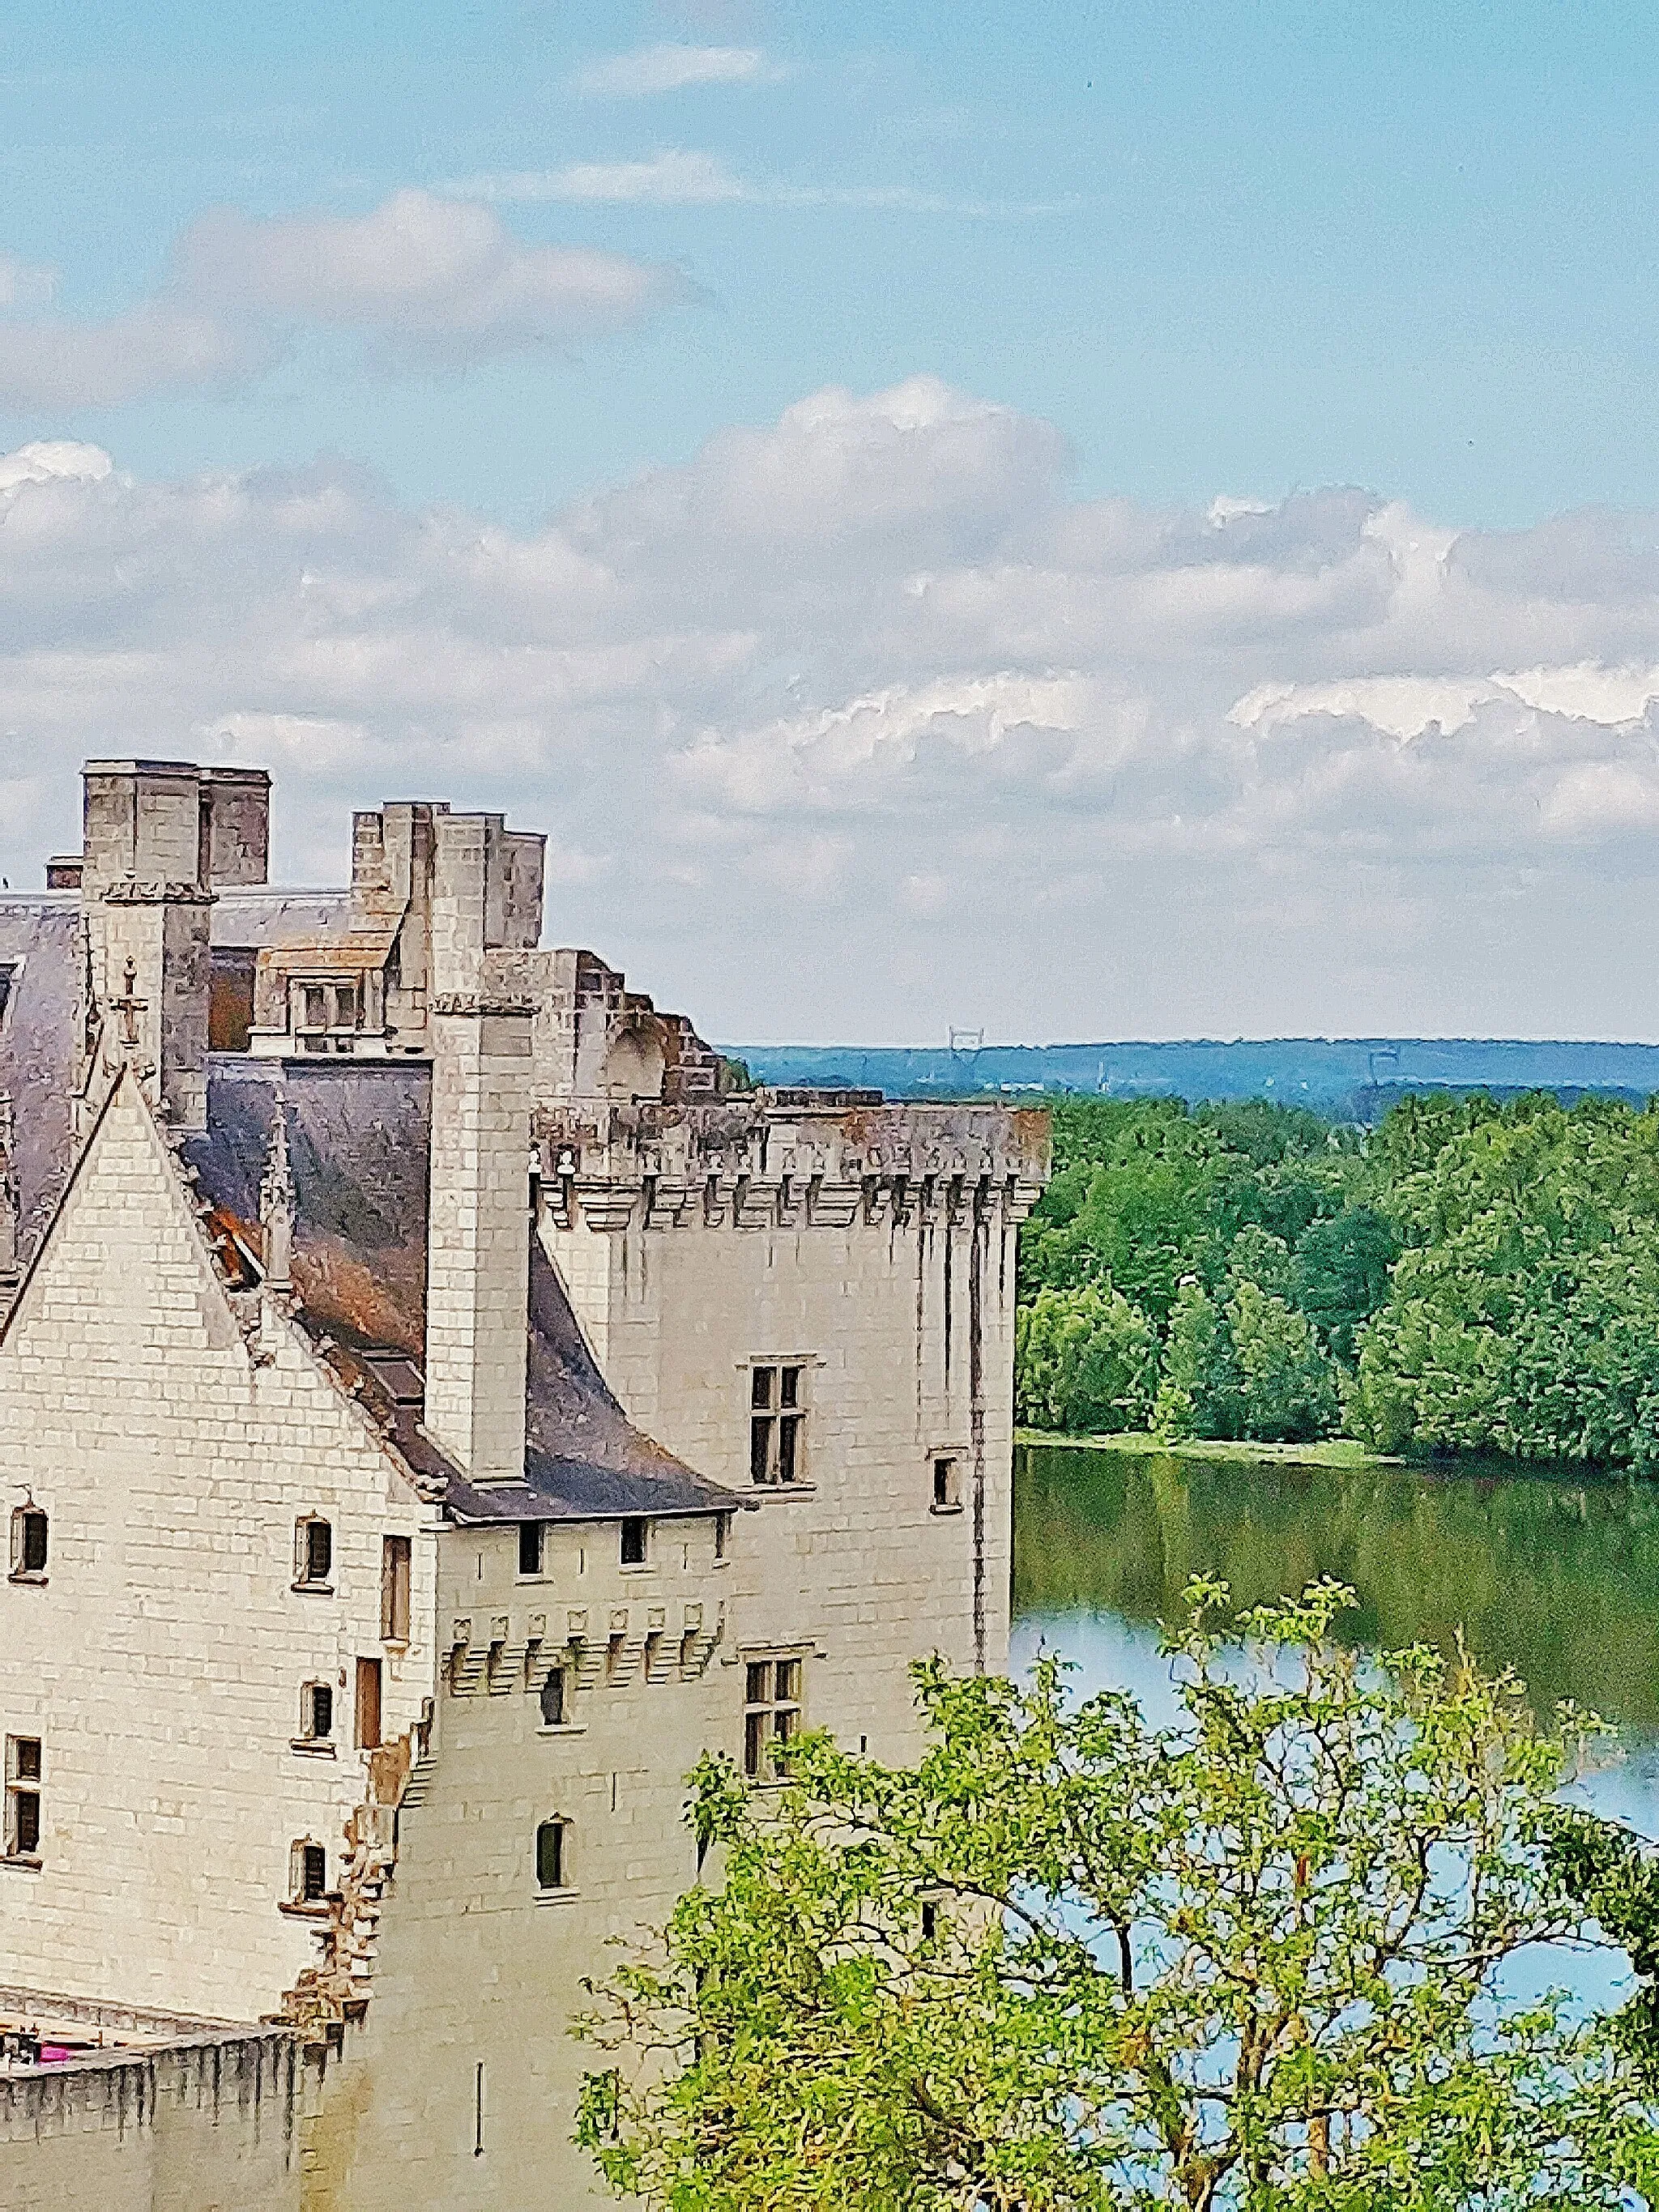 Photo showing: The Loire and the castle of Montsoreau, view from the village. Monstoreau, in the Loire Valley, is listed one of the most beautiful villages of France, member of the most beautiful villages of the world.